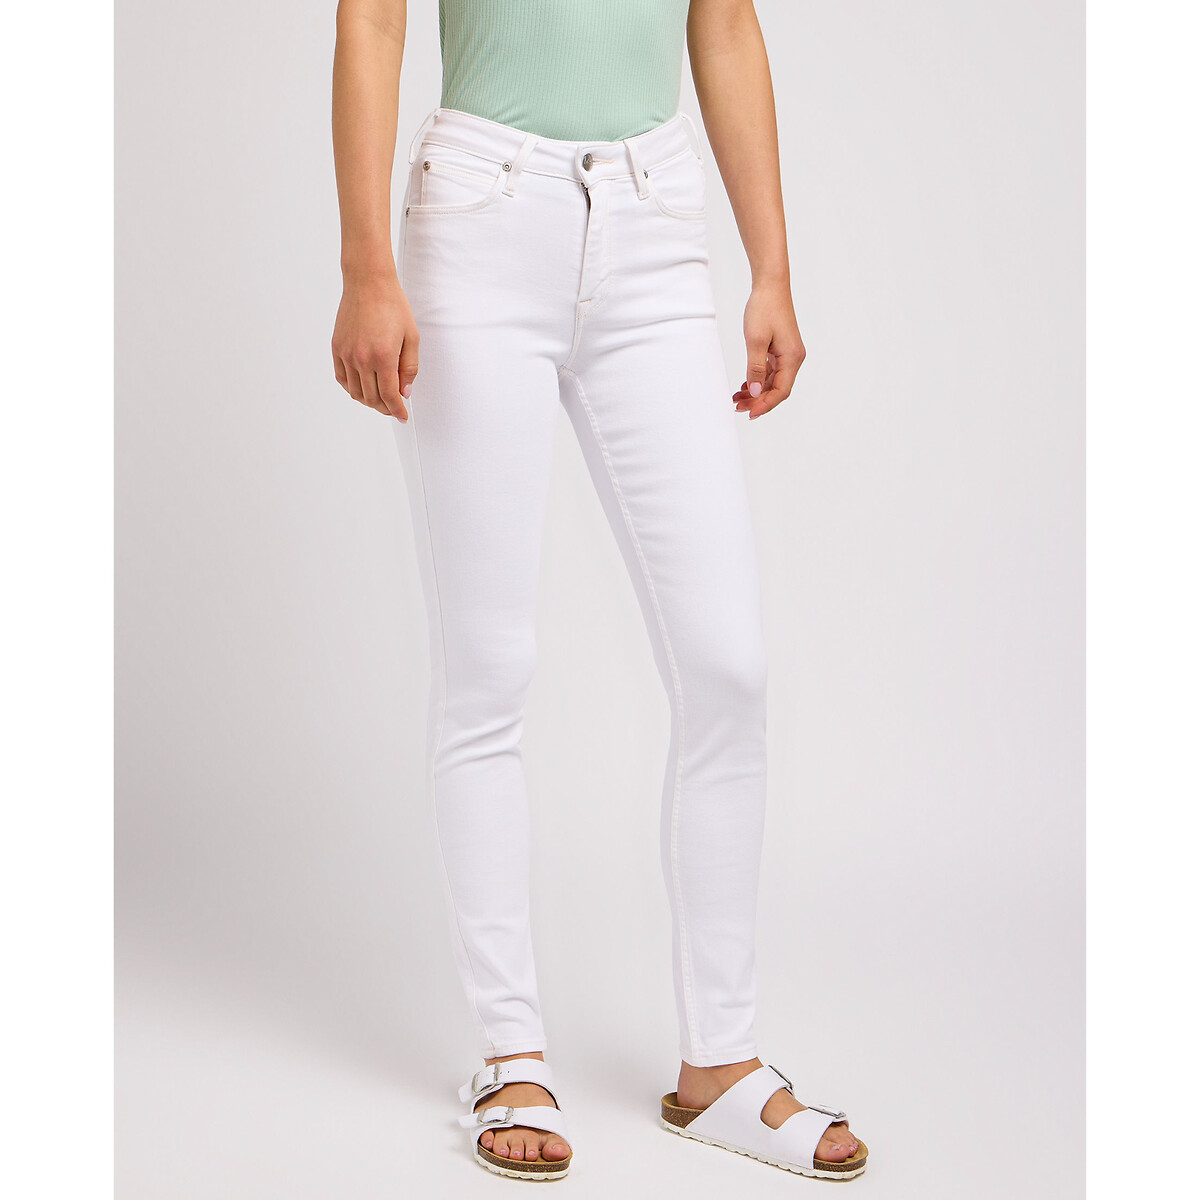 Foreverfit Skinny Jeans with High Waist